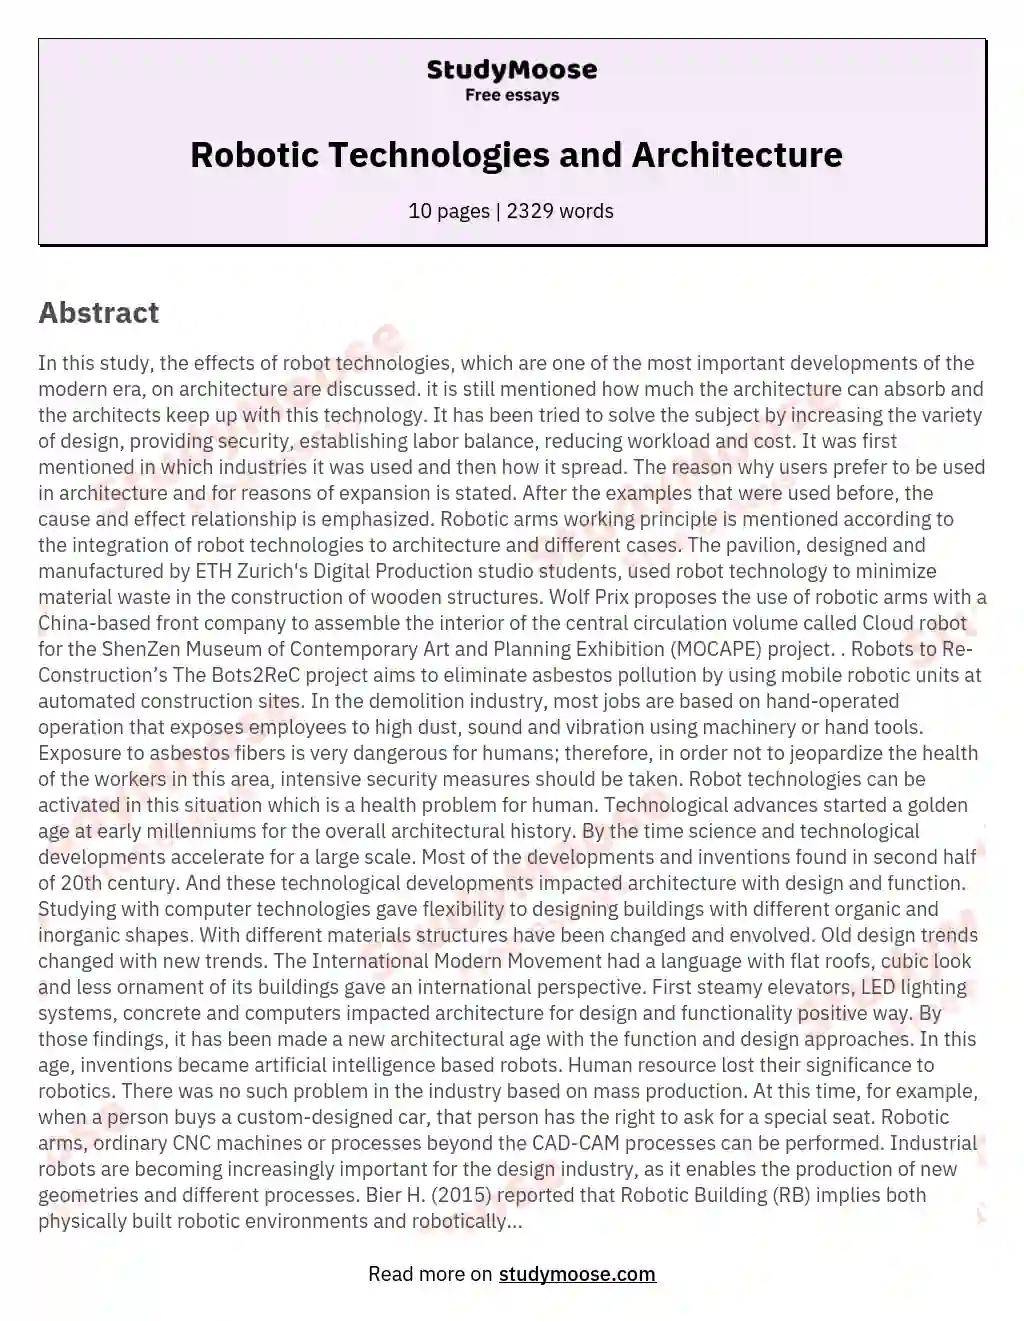  Robotic Technologies and Architecture essay